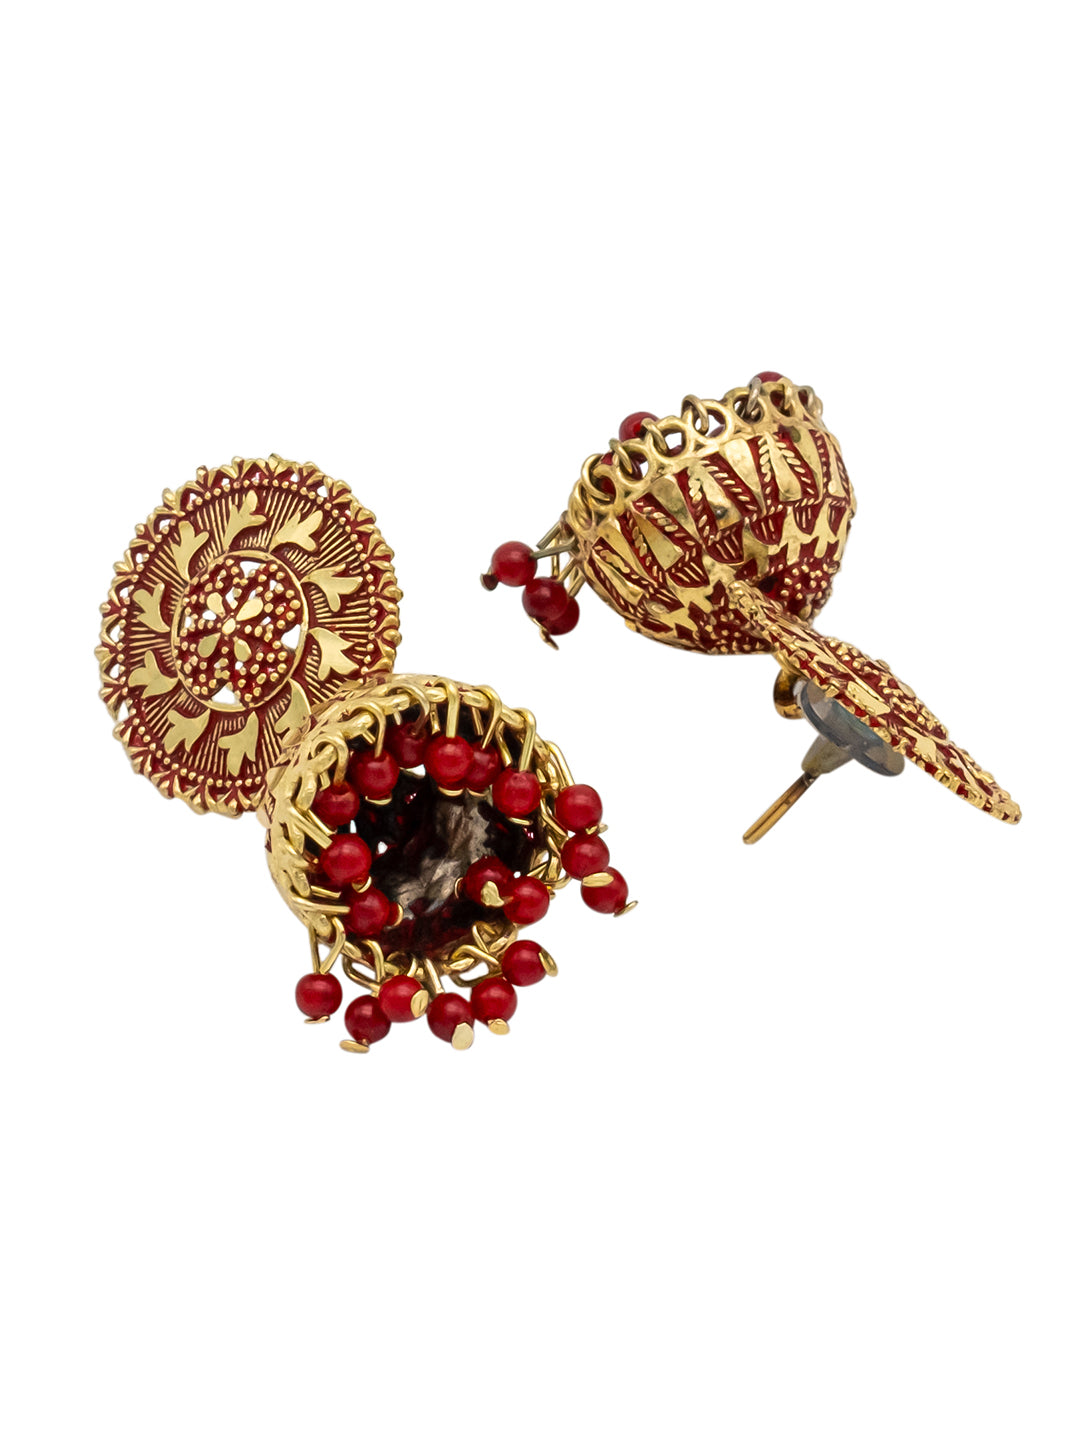 Traditional Indian Gold Plated Maroon With CZ, Crystal Studded Jhumka Earring For Women -Maroon (SJE_82_M)